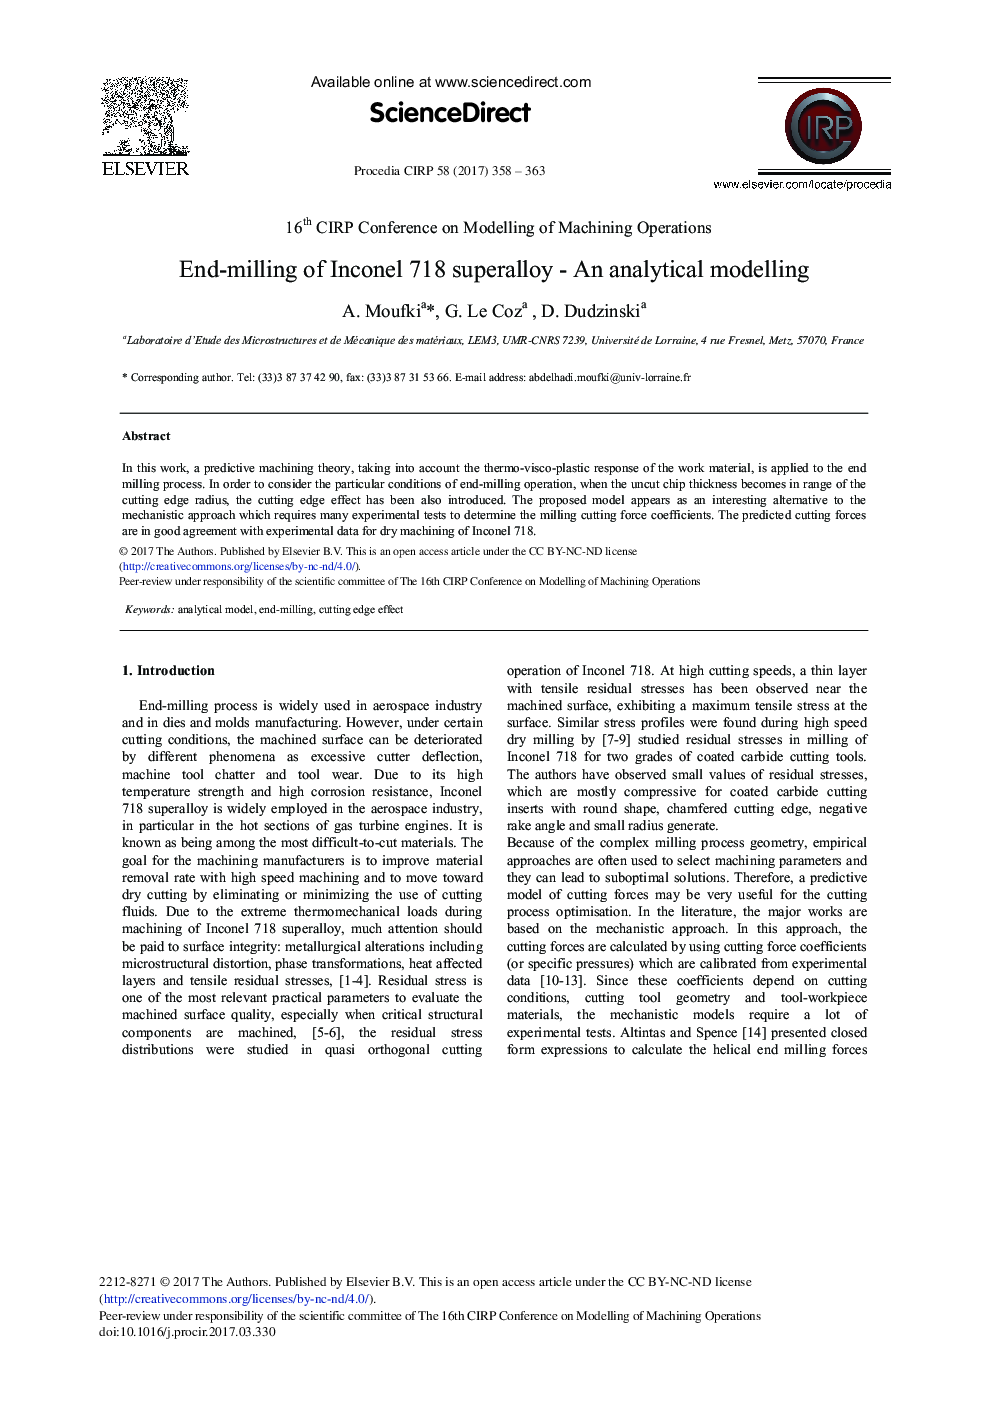 End-milling of Inconel 718 Superalloy - An Analytical Modelling